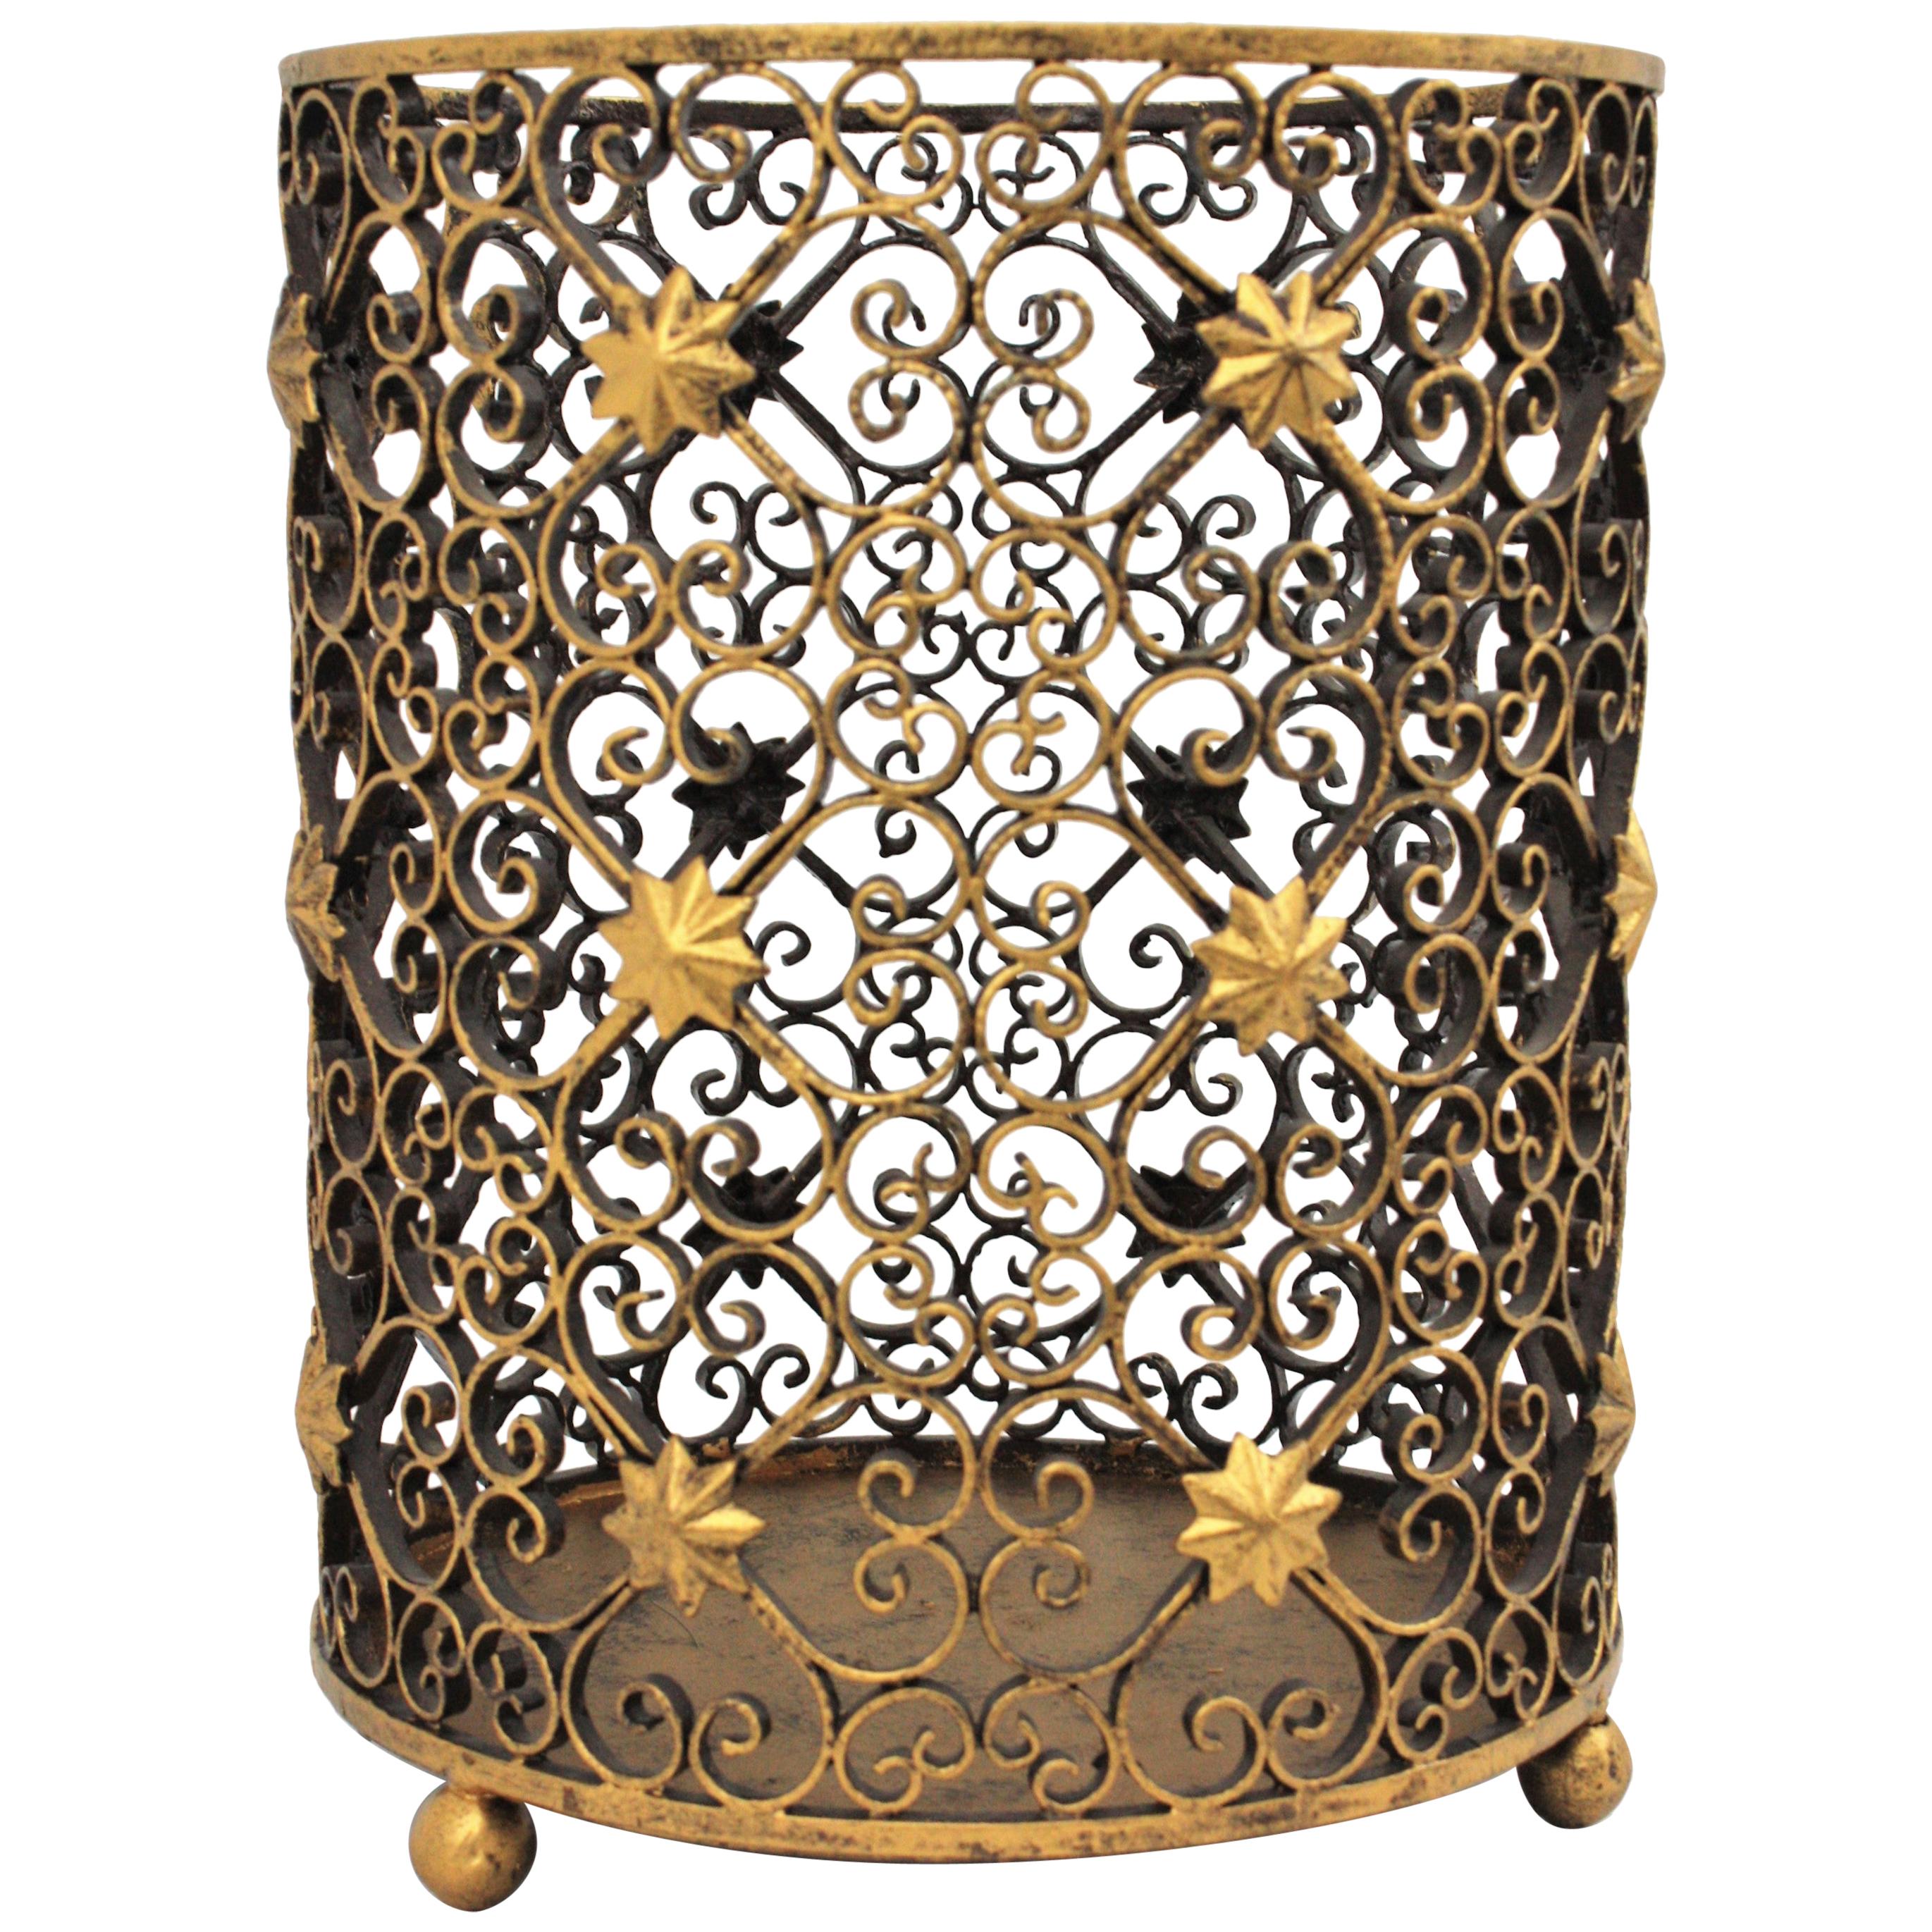 French Scrollwork Waste Basket Bin in Gilt Wrought Iron with Star Accents